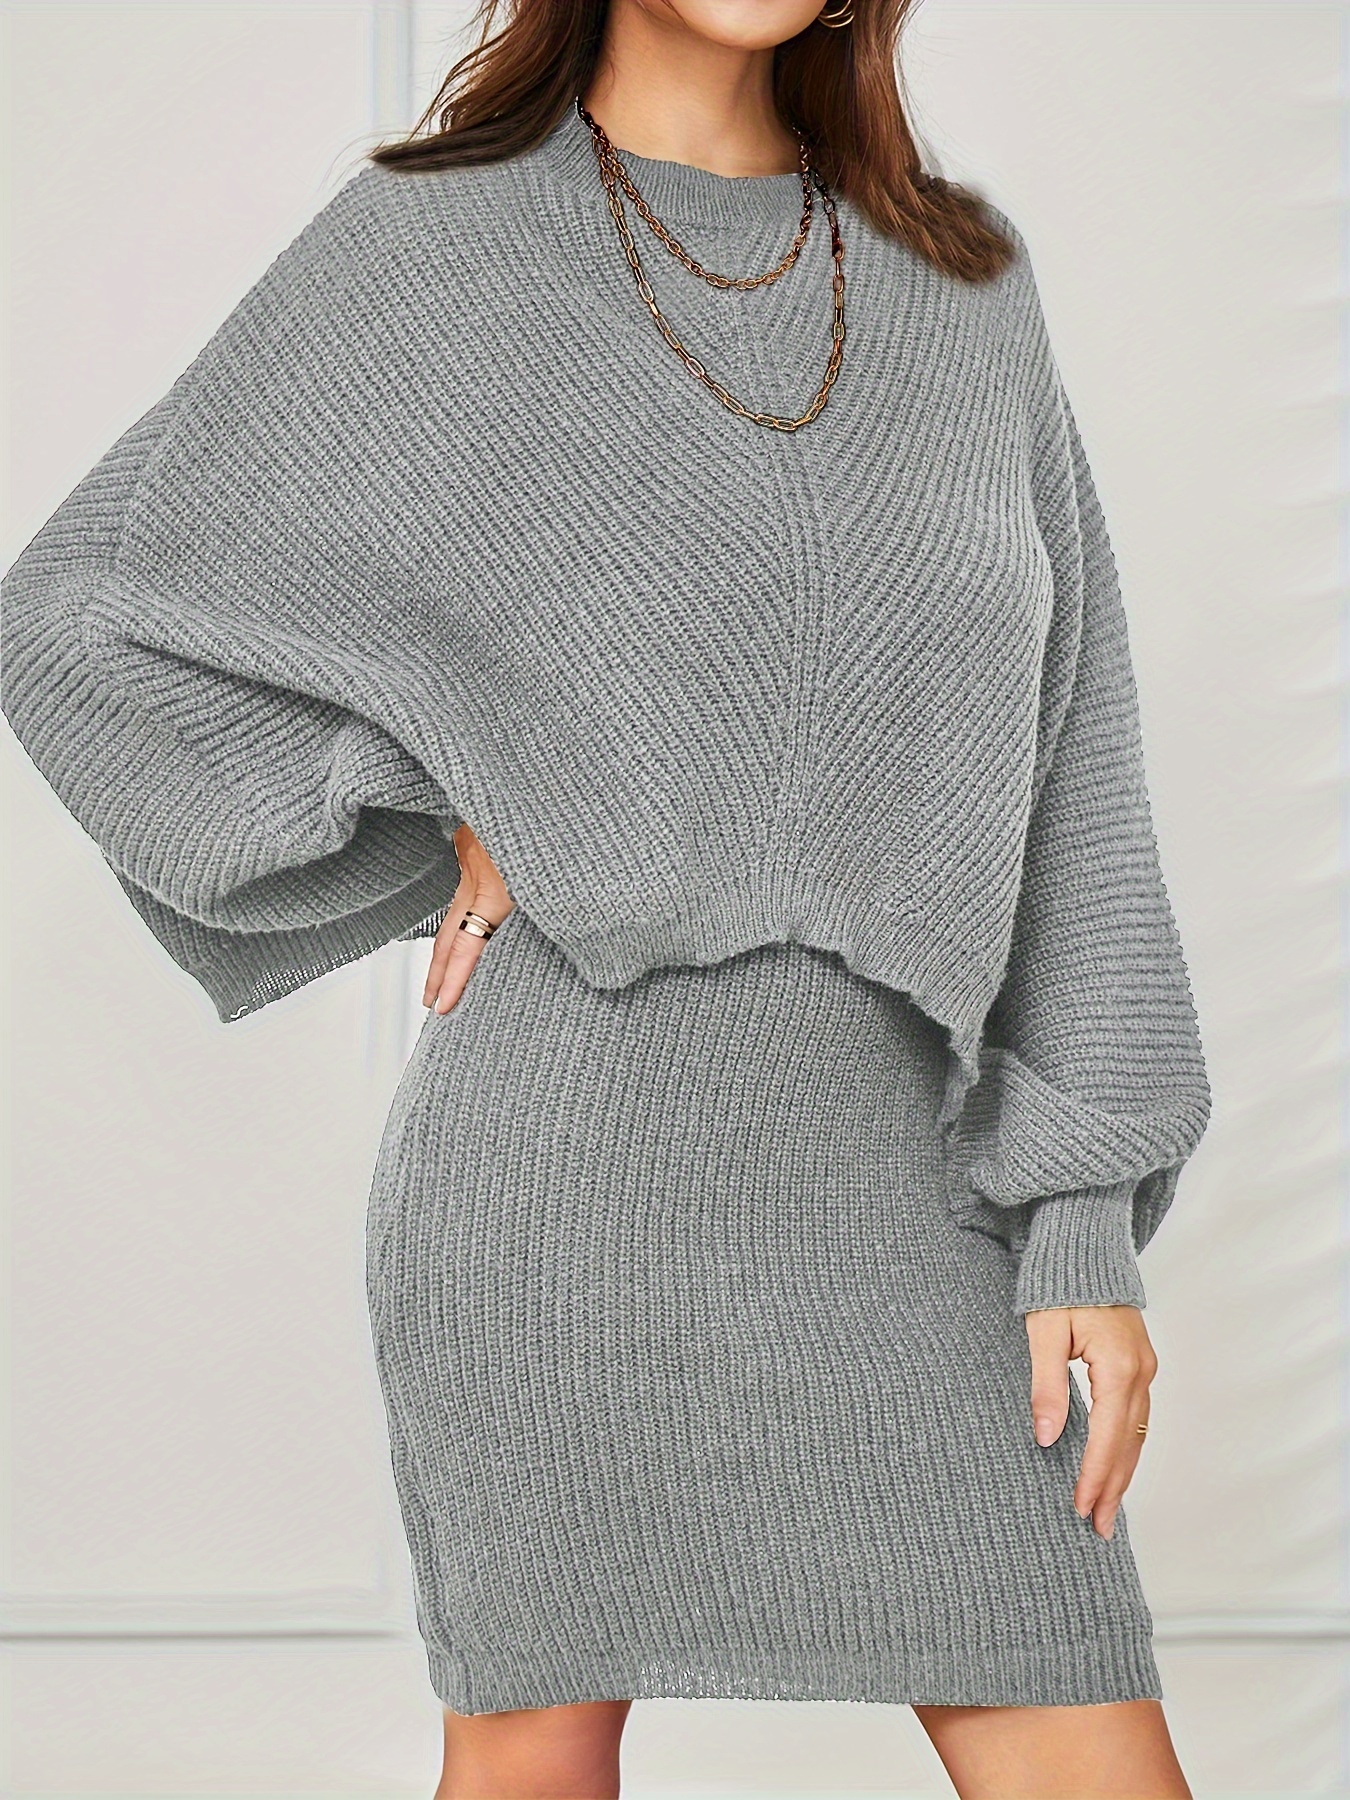 Knit Pullover Sweater and Cami Dress Set, Women Elegant Knitted